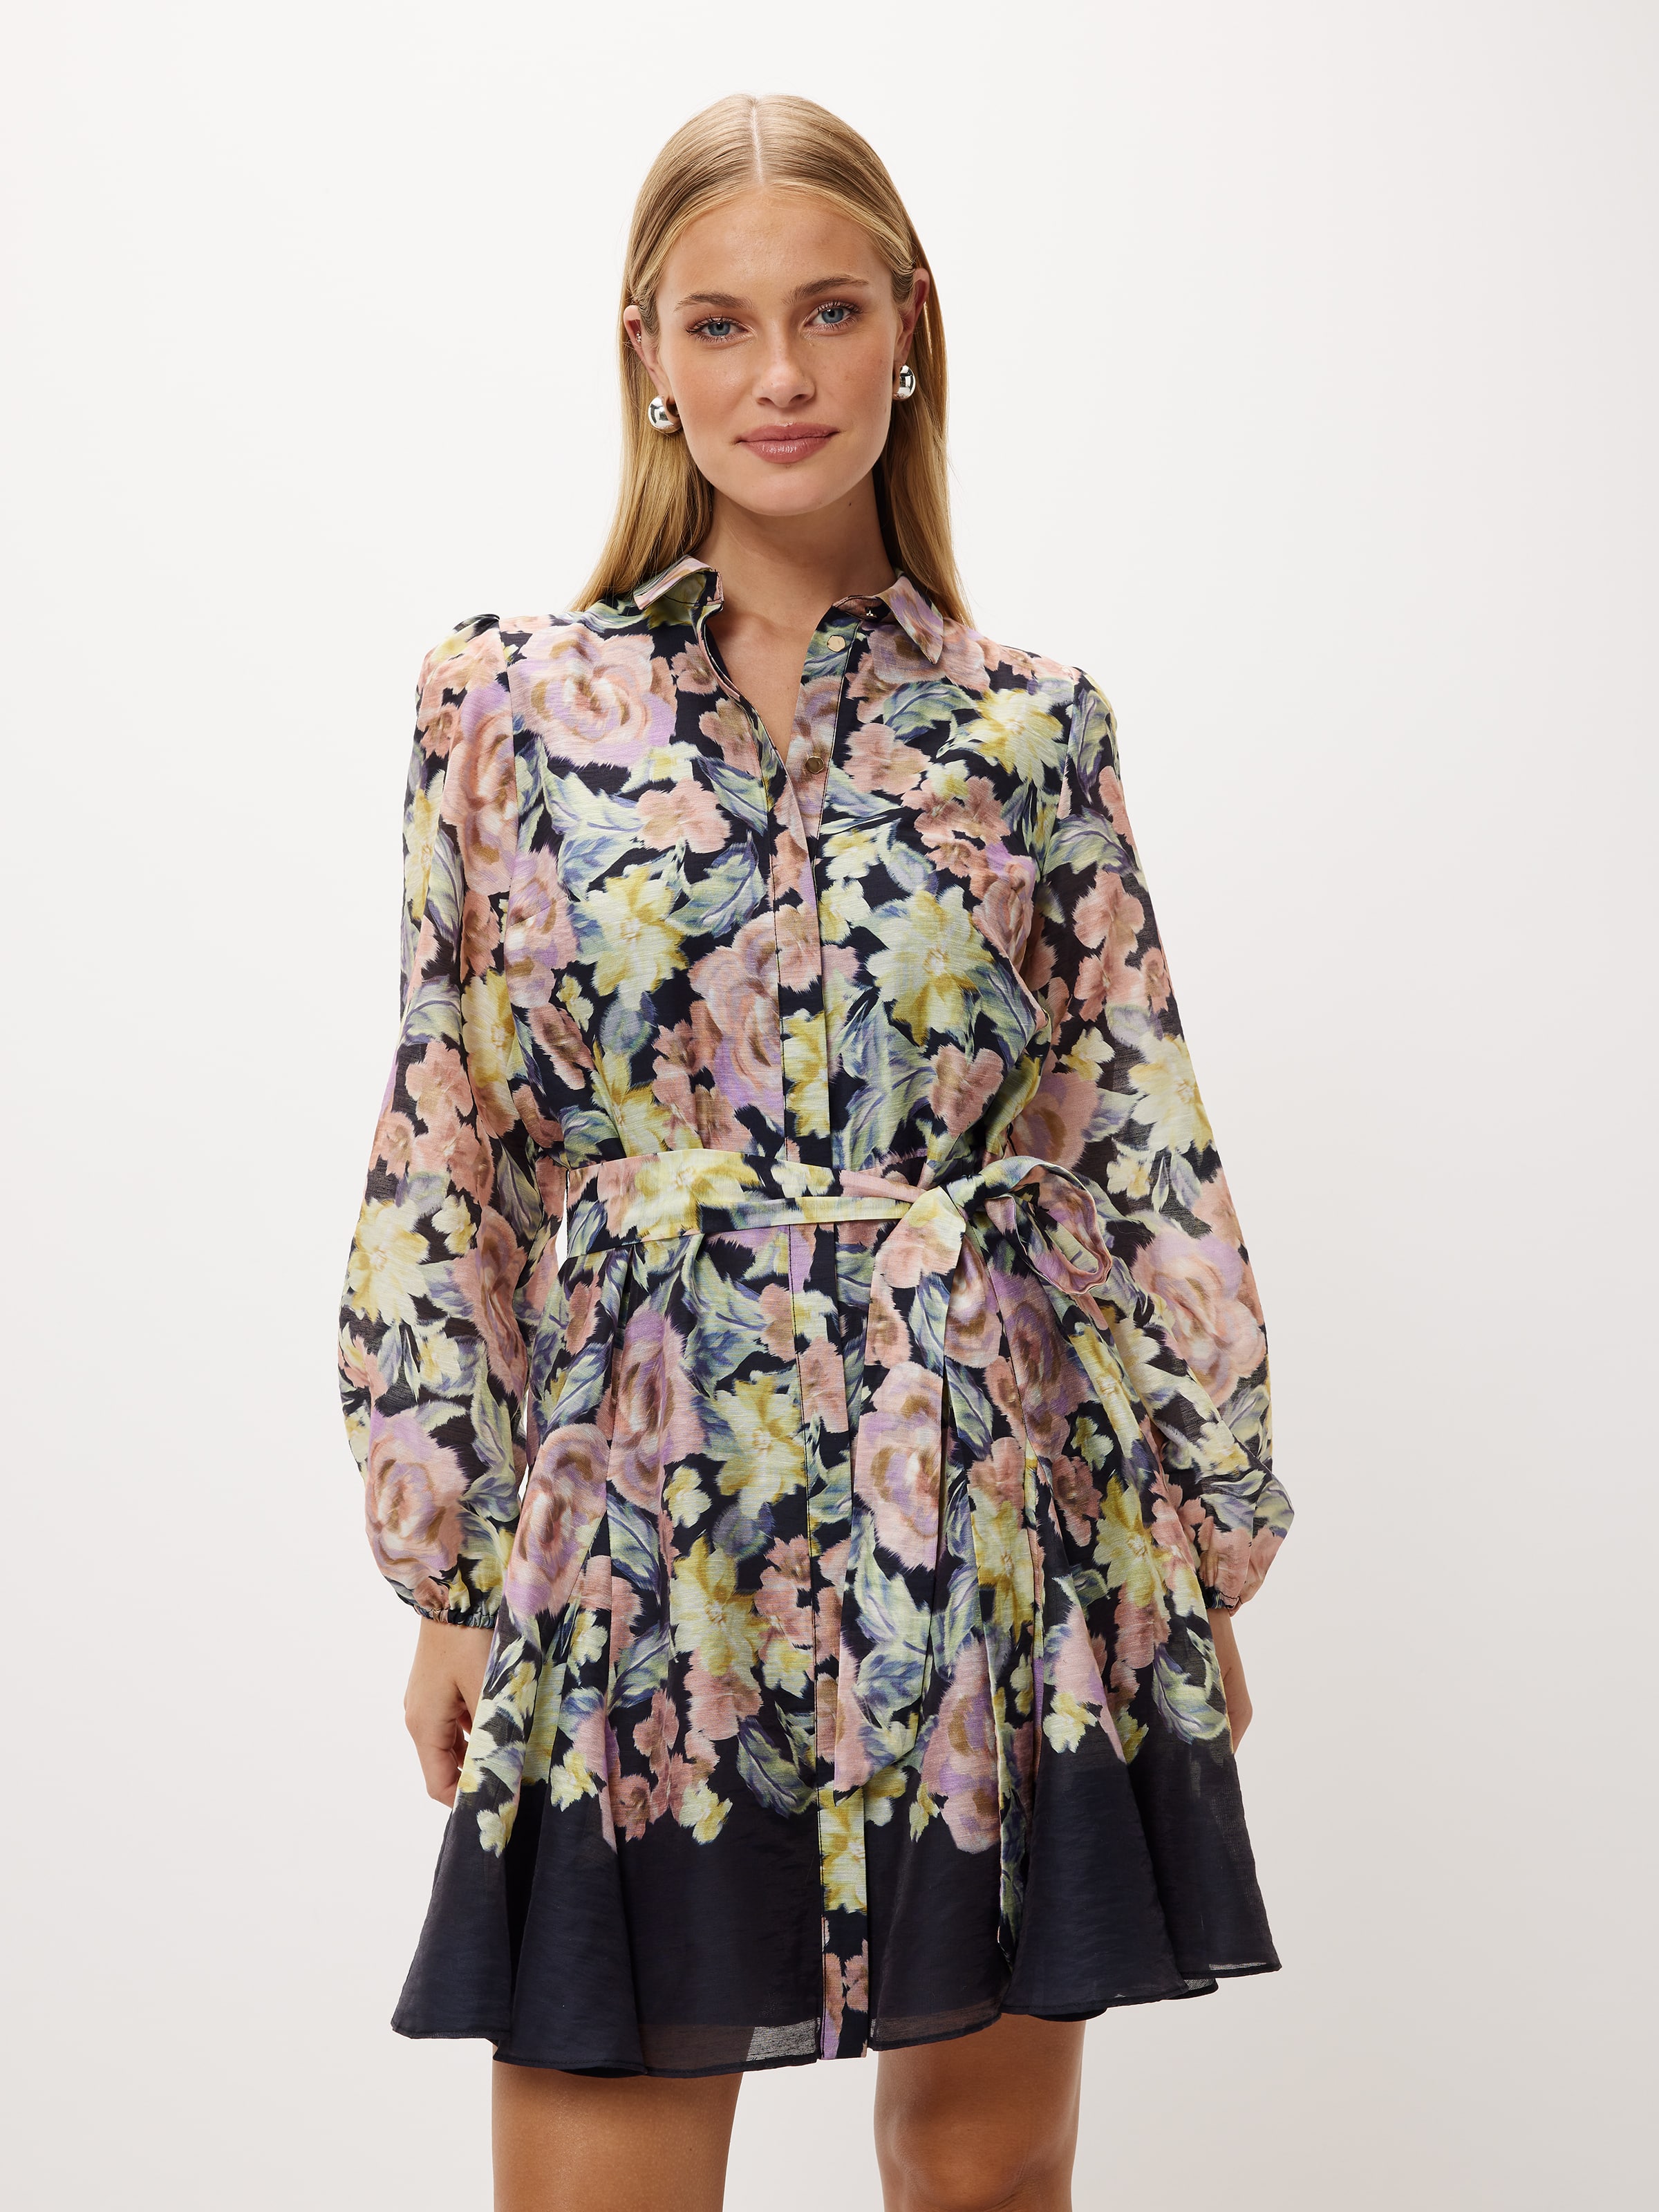 Plus Floral Print Belted Dress for Sale Australia, New Collection Online